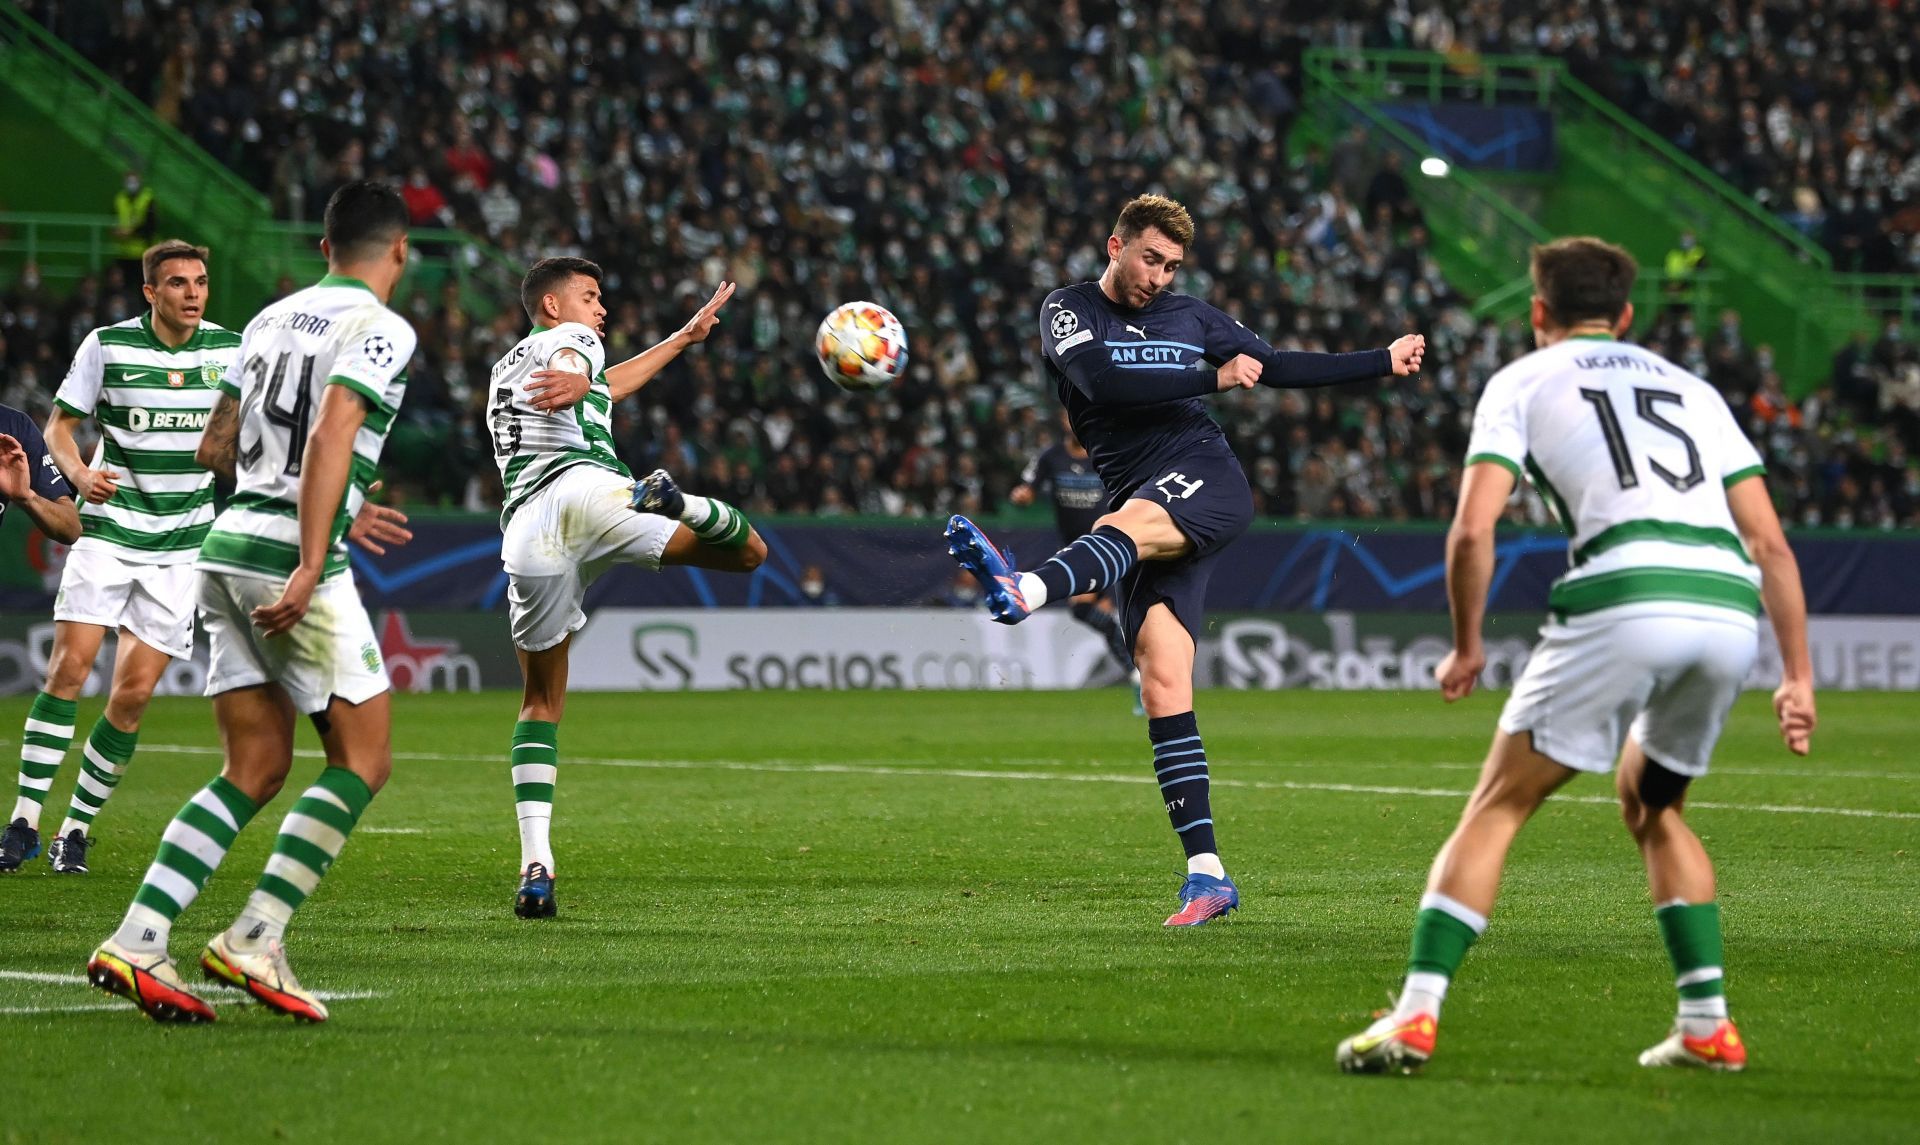 Manchester City defeated Sporting Lisbon 5-0 on Tuesday